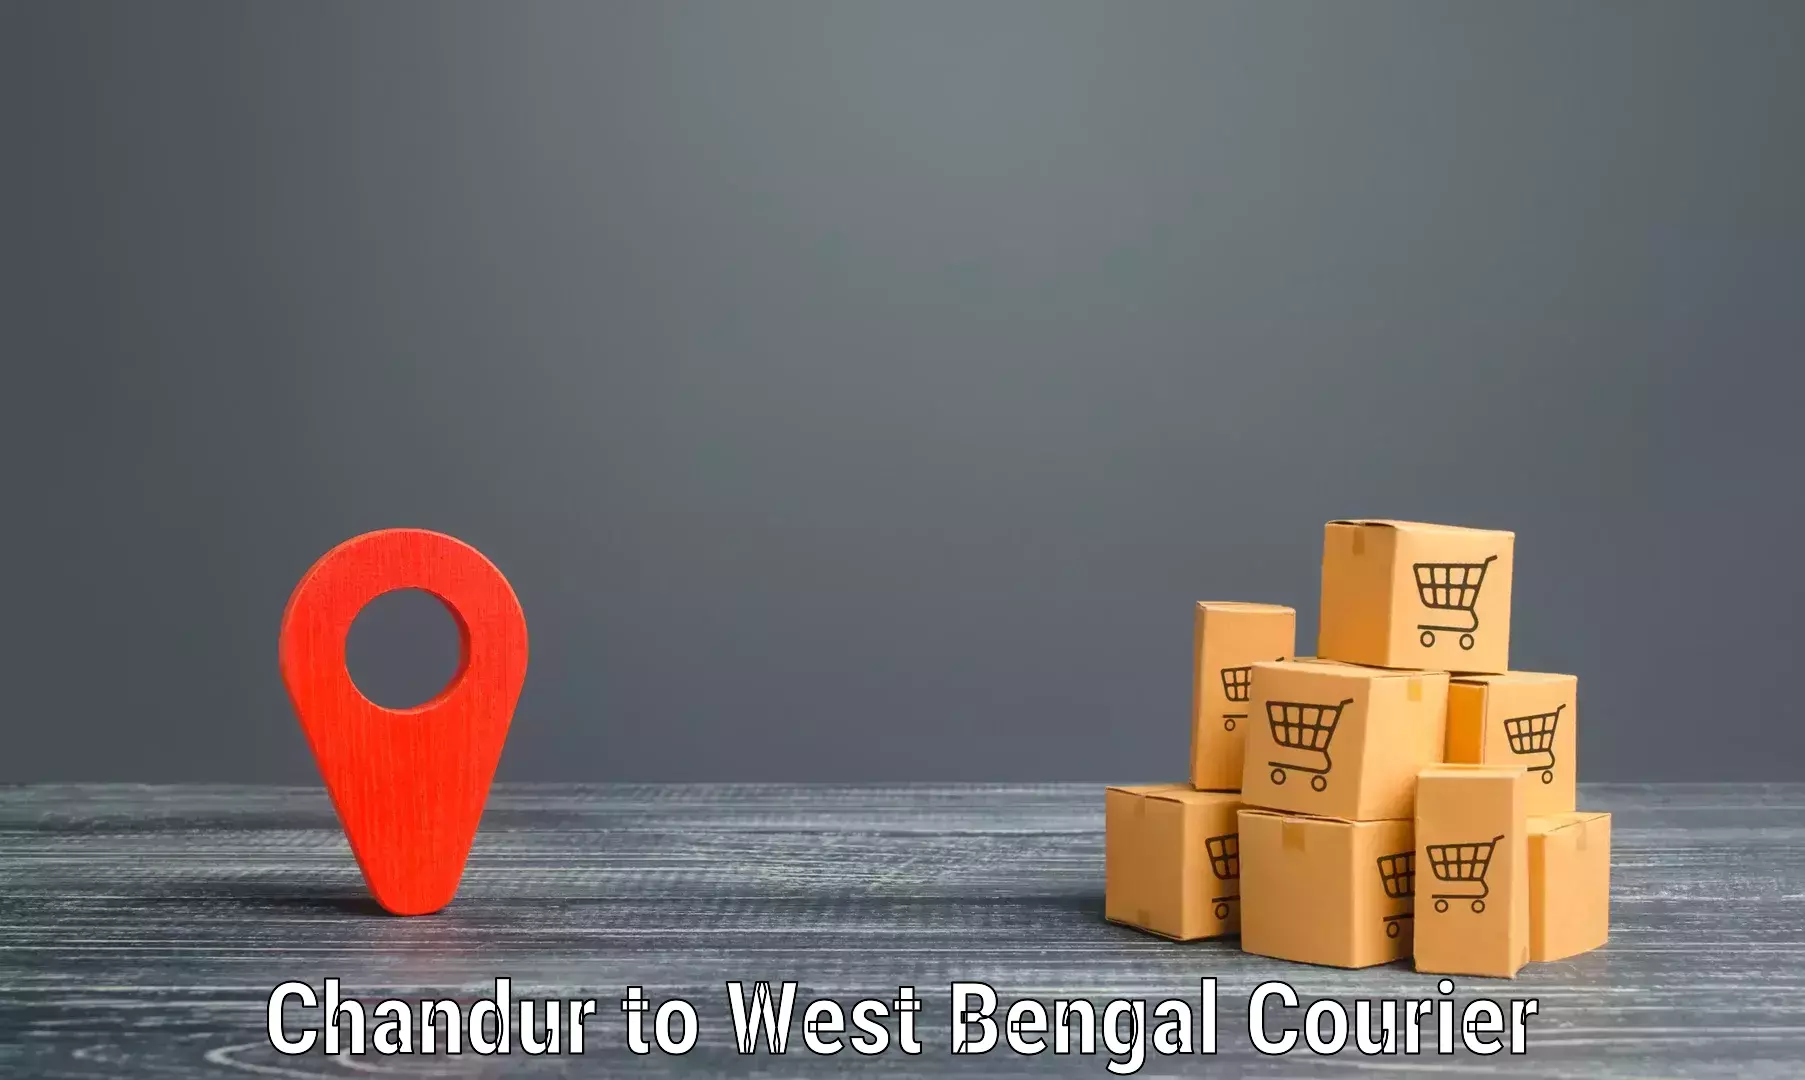 State-of-the-art courier technology Chandur to South 24 Parganas